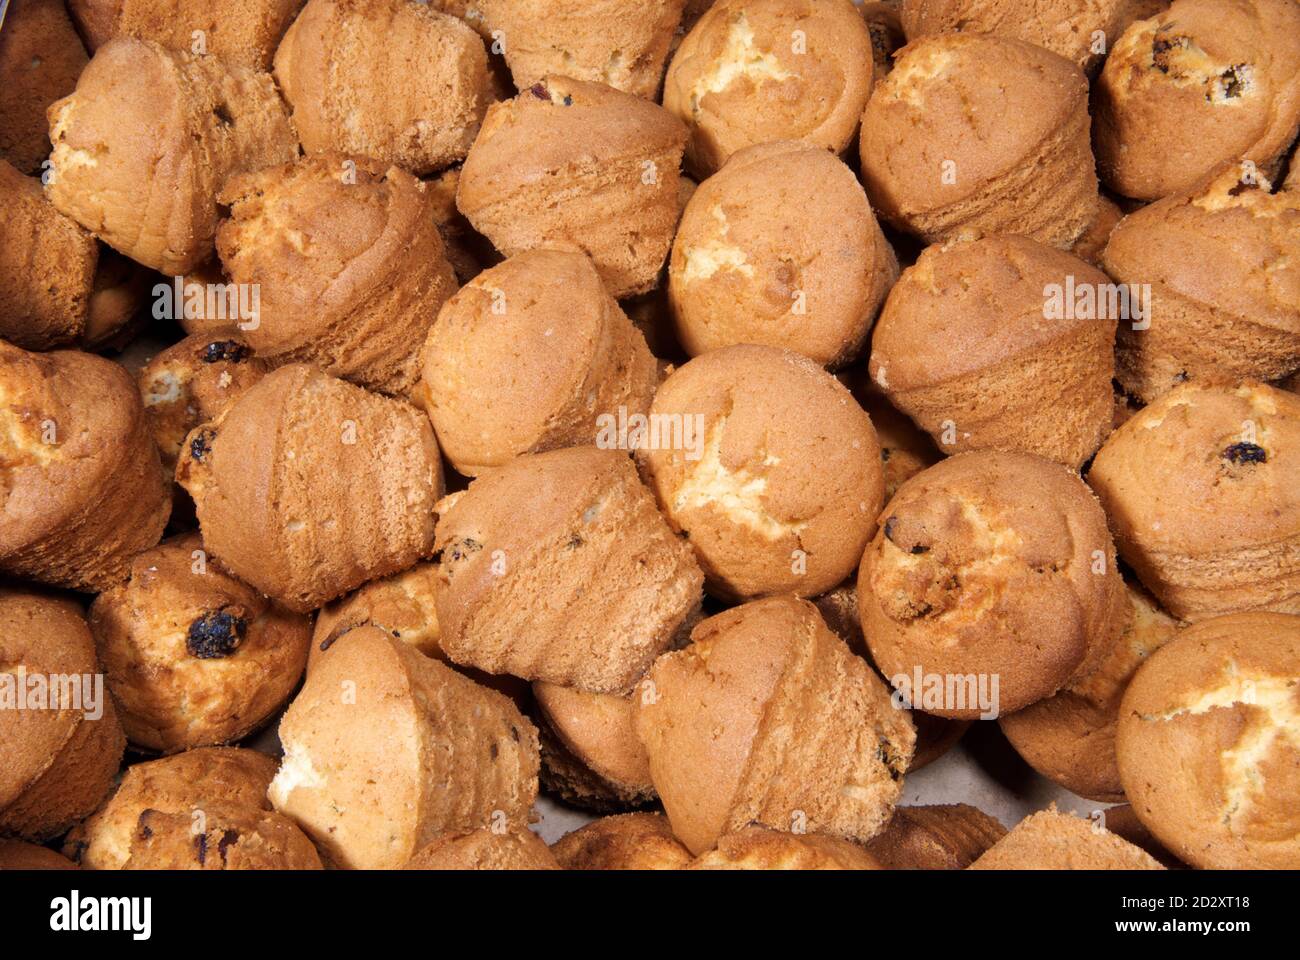 Abstract background with baked sweet muffins. Stock Photo